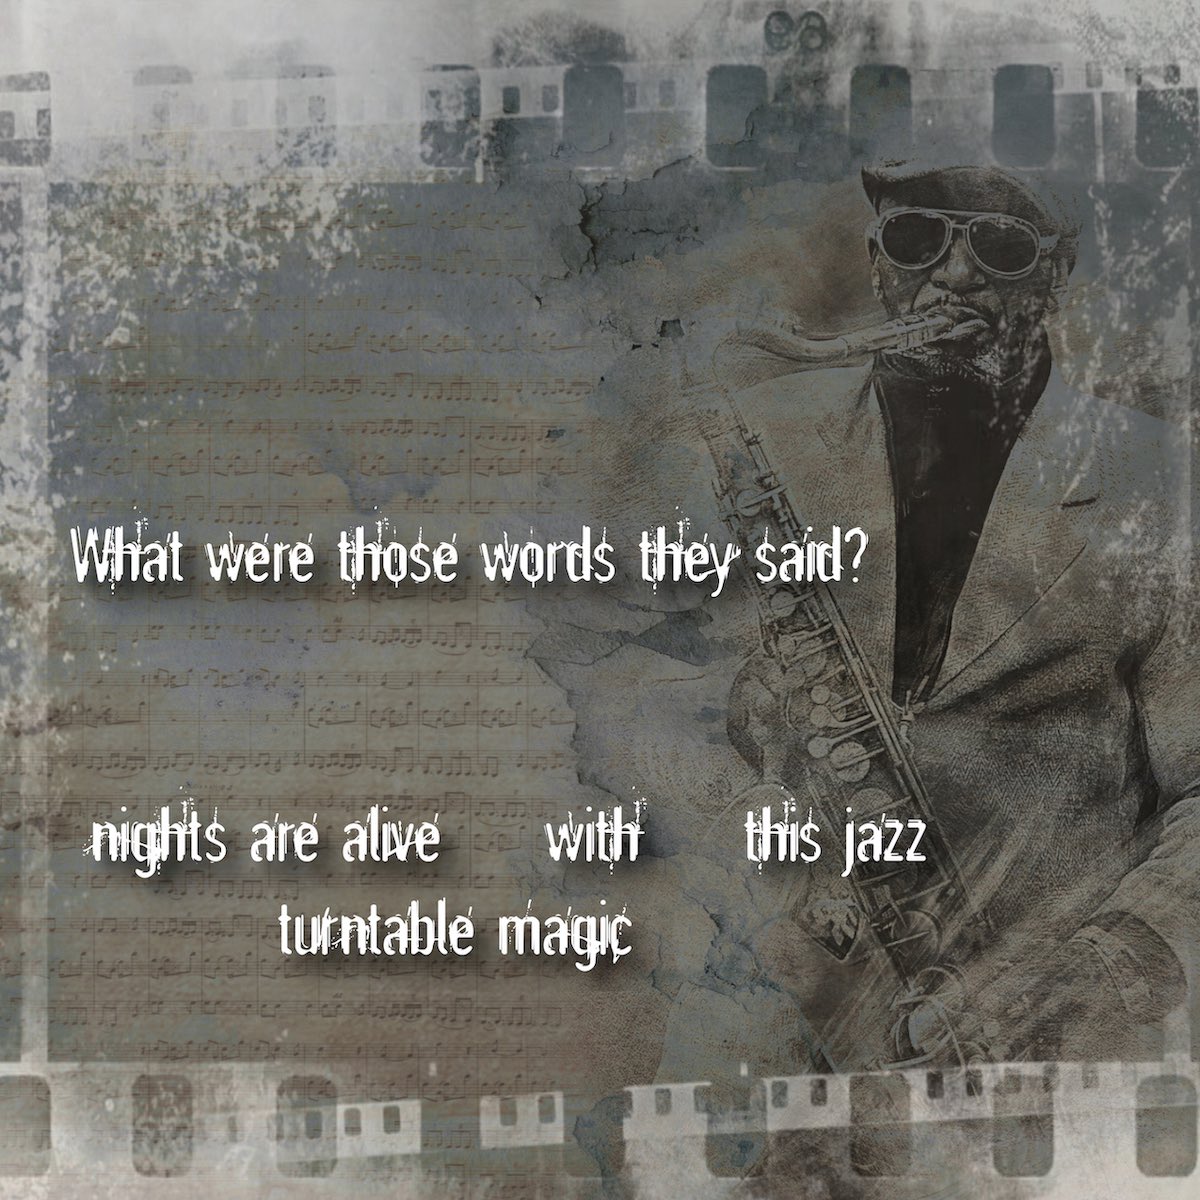 “What were those words they said?”

NEW RELEASE
limited edition poem | handcrafted book journal

JAZZ IN PASTEL
by: Roman Newell

wp.me/pf1XML-185

#newrelease #poetry #romannewell #jazzinpastel #bookrec #turntablemagic #music #handcrafted #journal #jazz #bluenotes